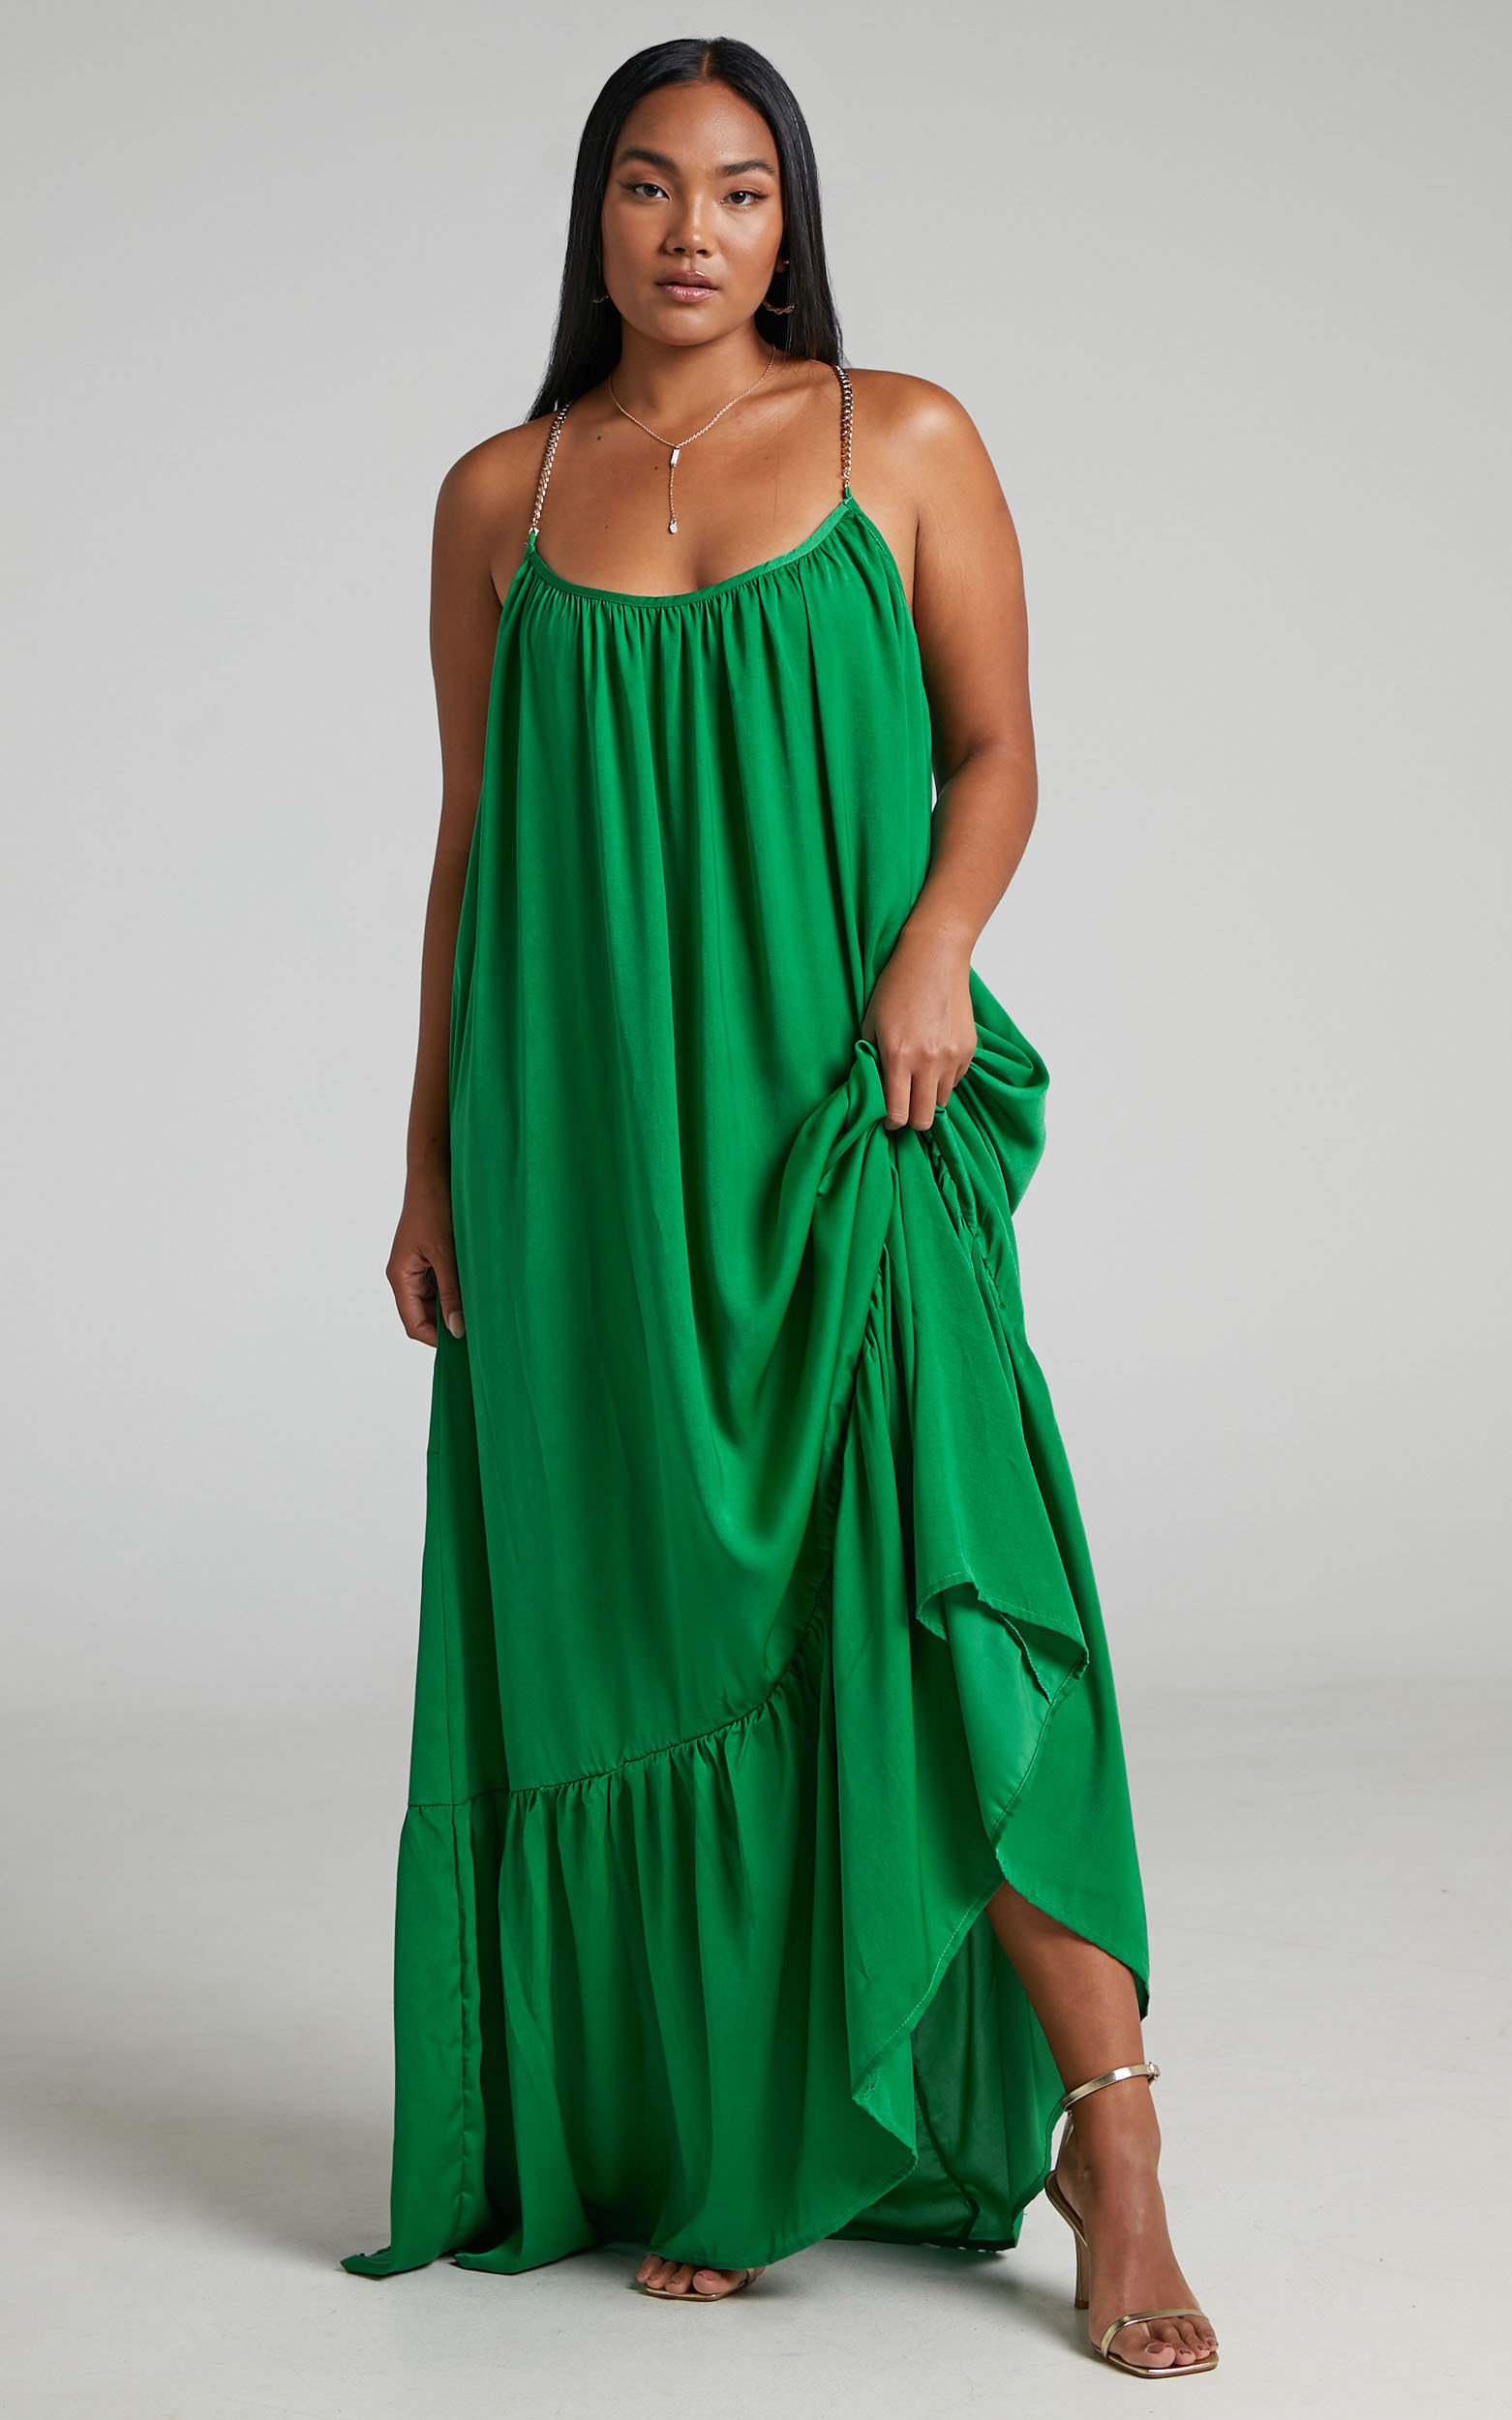 Sychie Chain Straps Relaxed Maxi Dress in Green - 06, GRN1, hi-res image number null